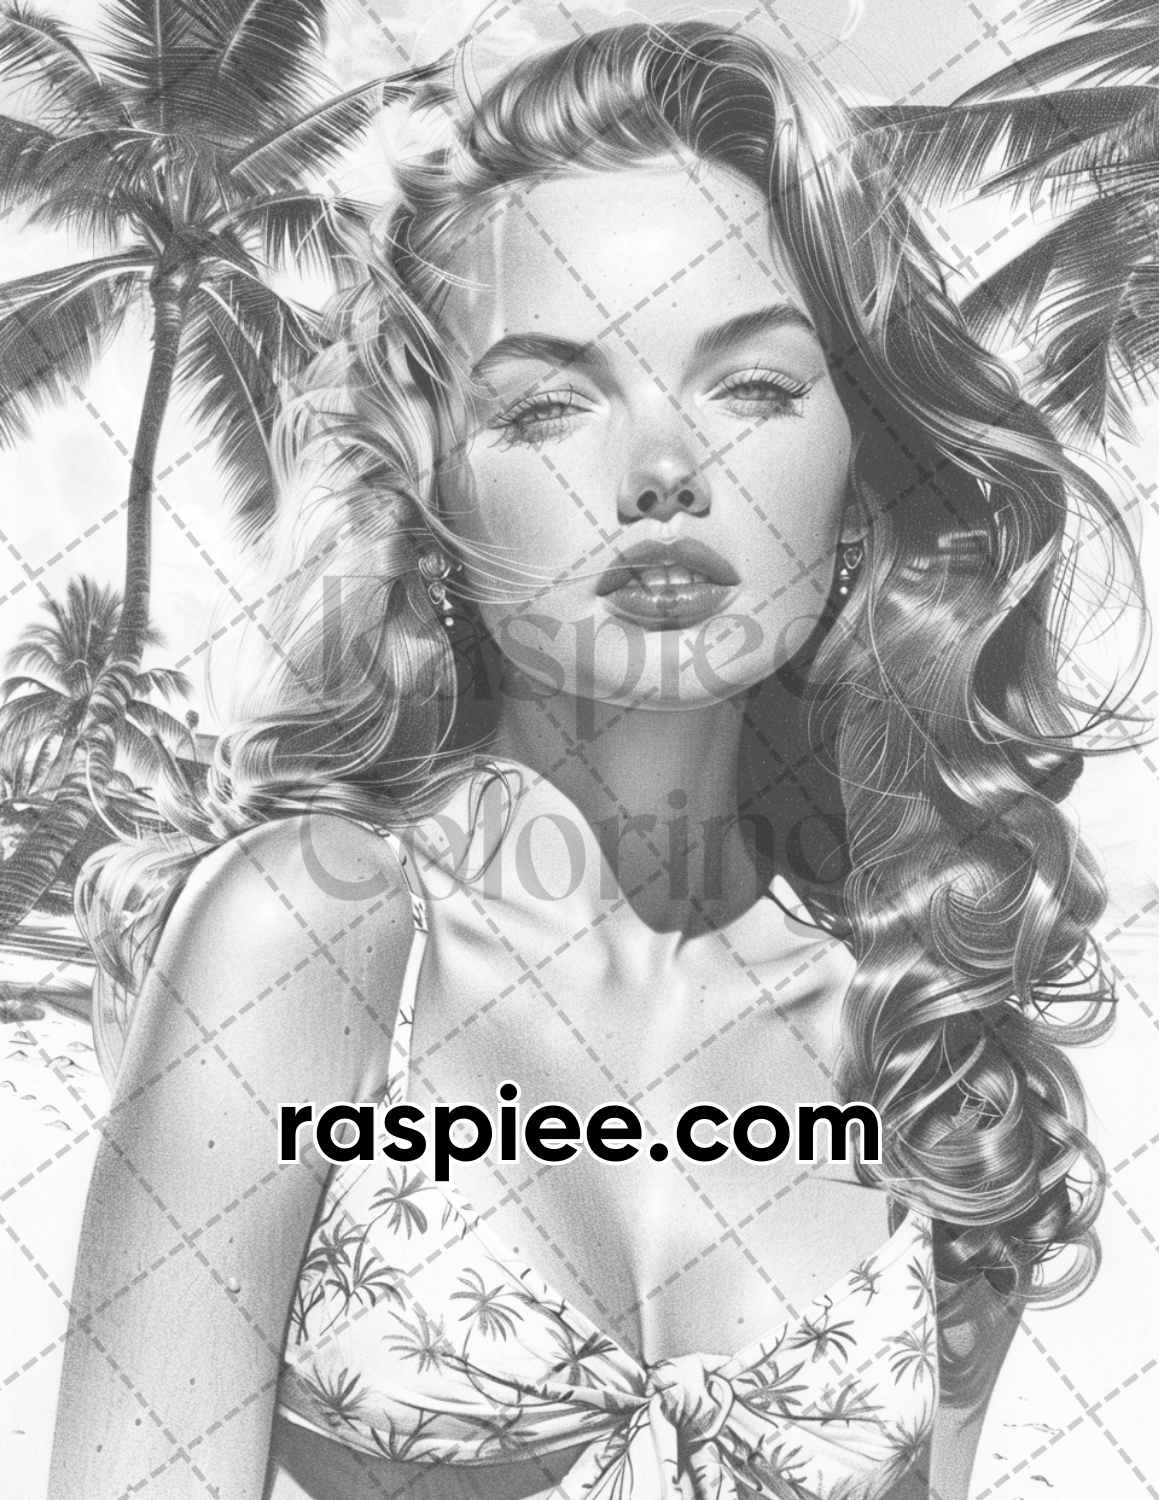 adult coloring pages, adult coloring sheets, adult coloring book pdf, adult coloring book printable, grayscale coloring pages, grayscale coloring books, grayscale illustration, portrait adult coloring pages, portrait adult coloring book, Vintage Summer Pin Up Girls Adult Coloring Pages